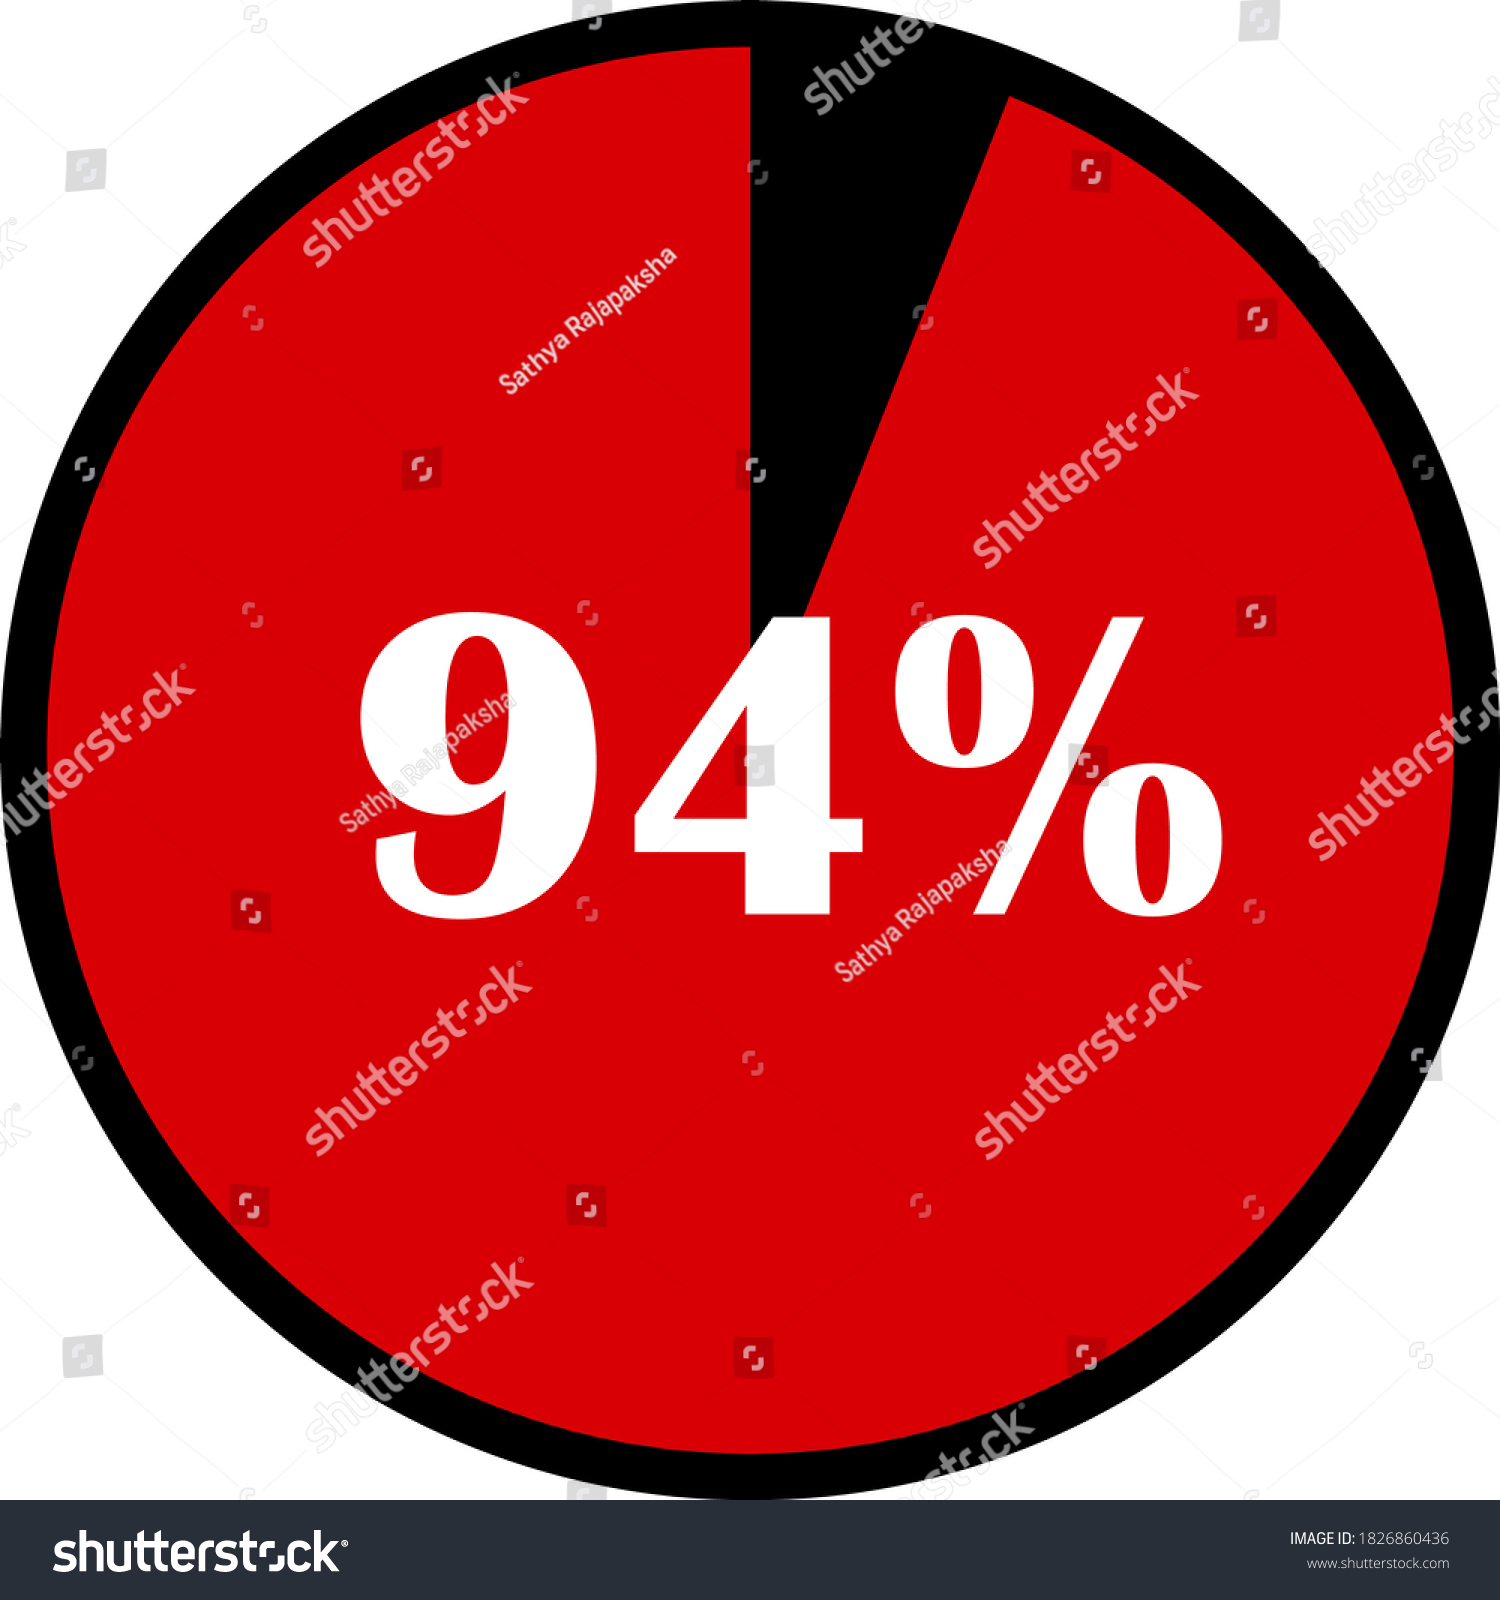 SVG of circle percentage diagrams meter ready-to-use for web design, user interface UI or infographic - indicator with red & black showing 94% svg